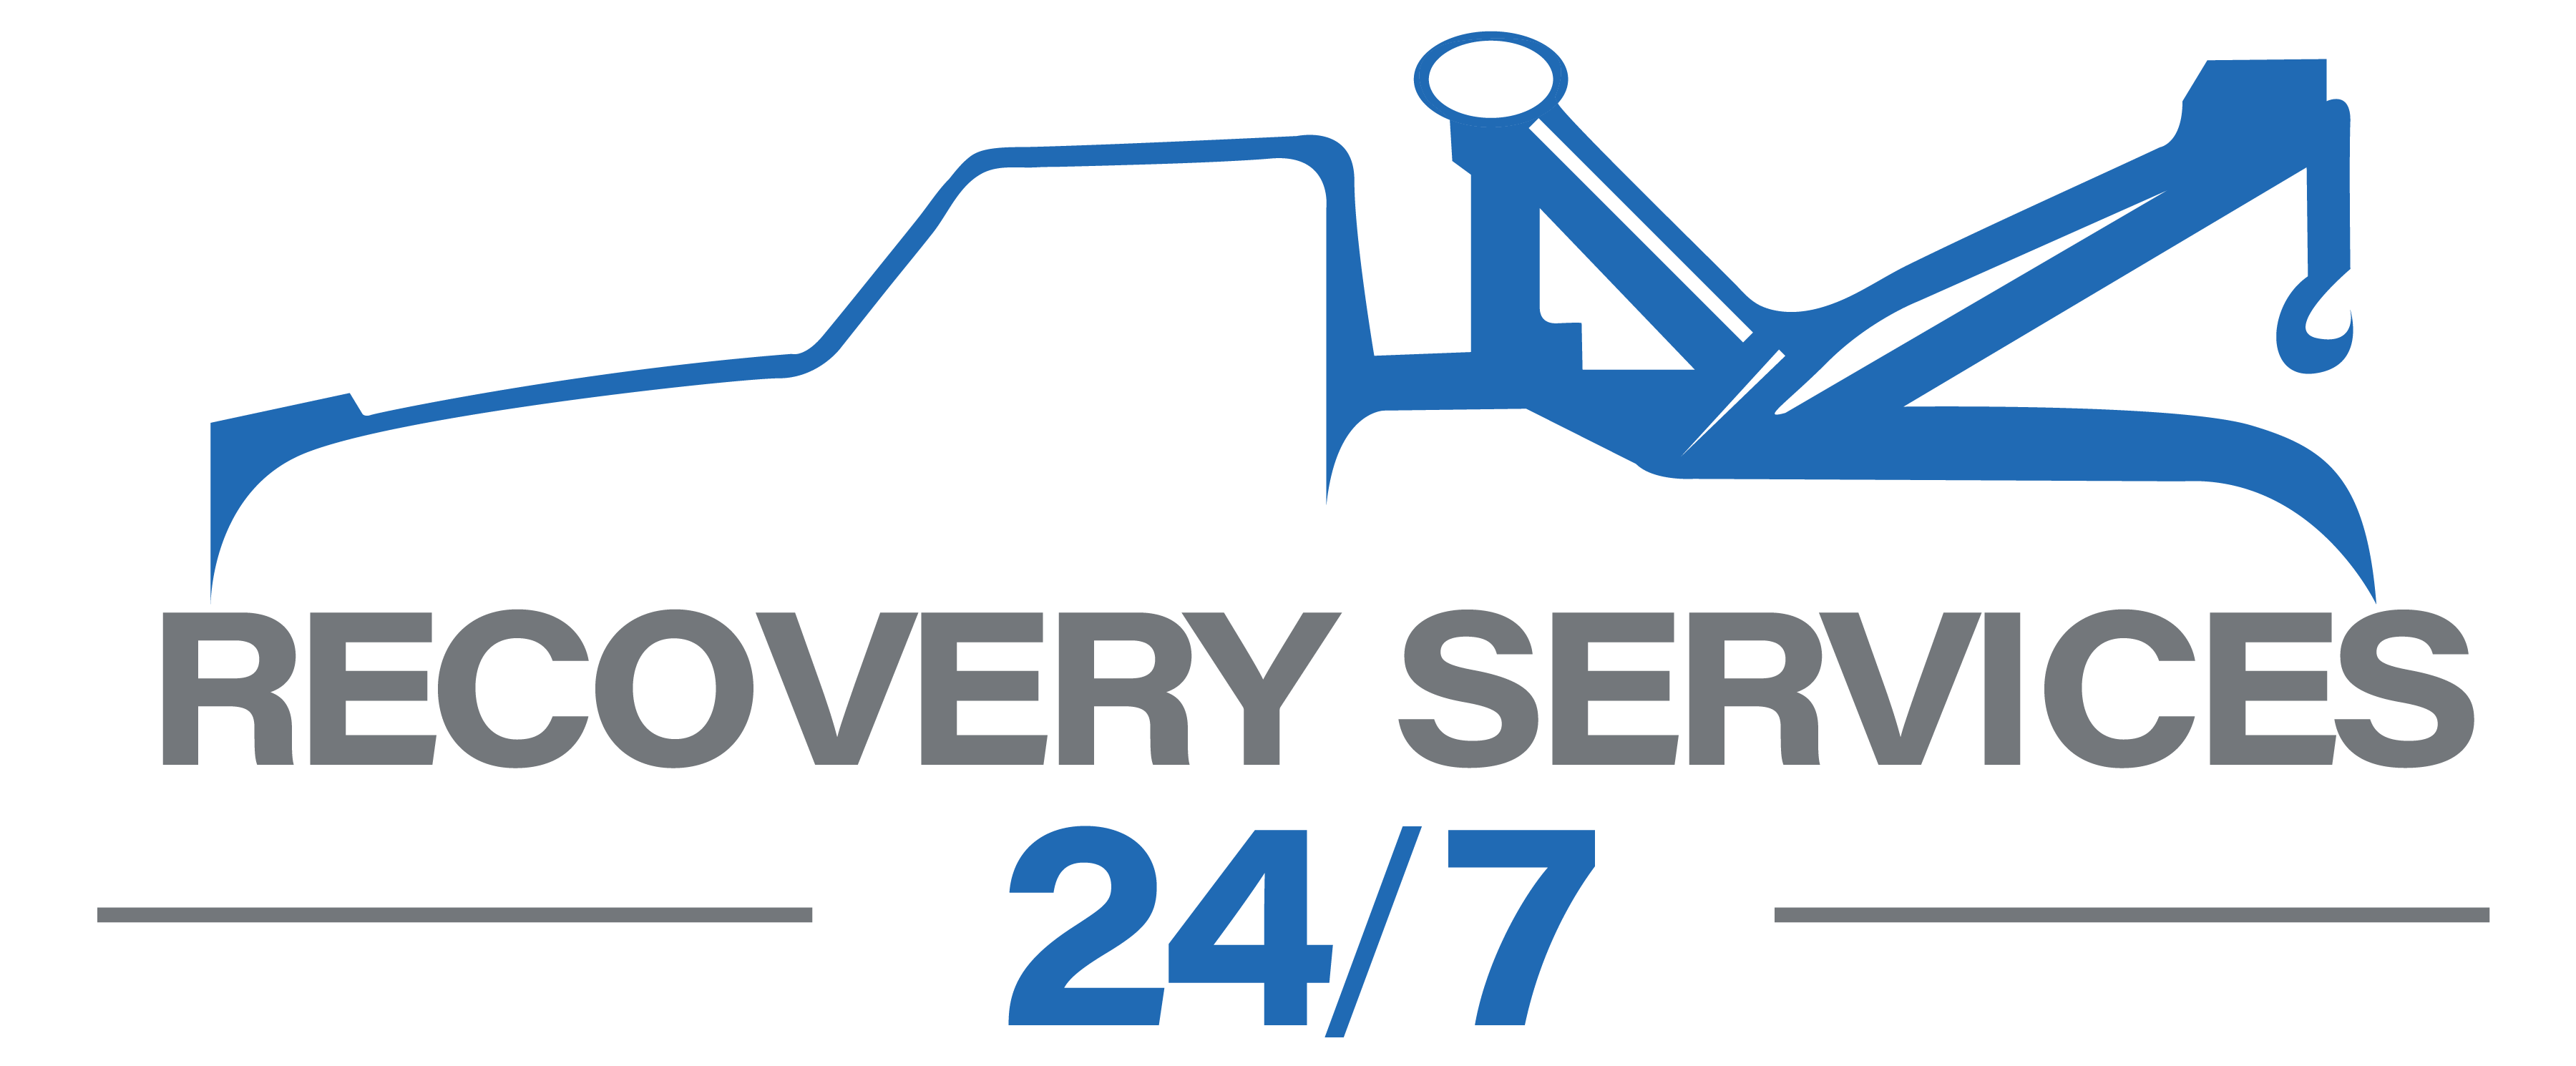 Recovery Services 24/7